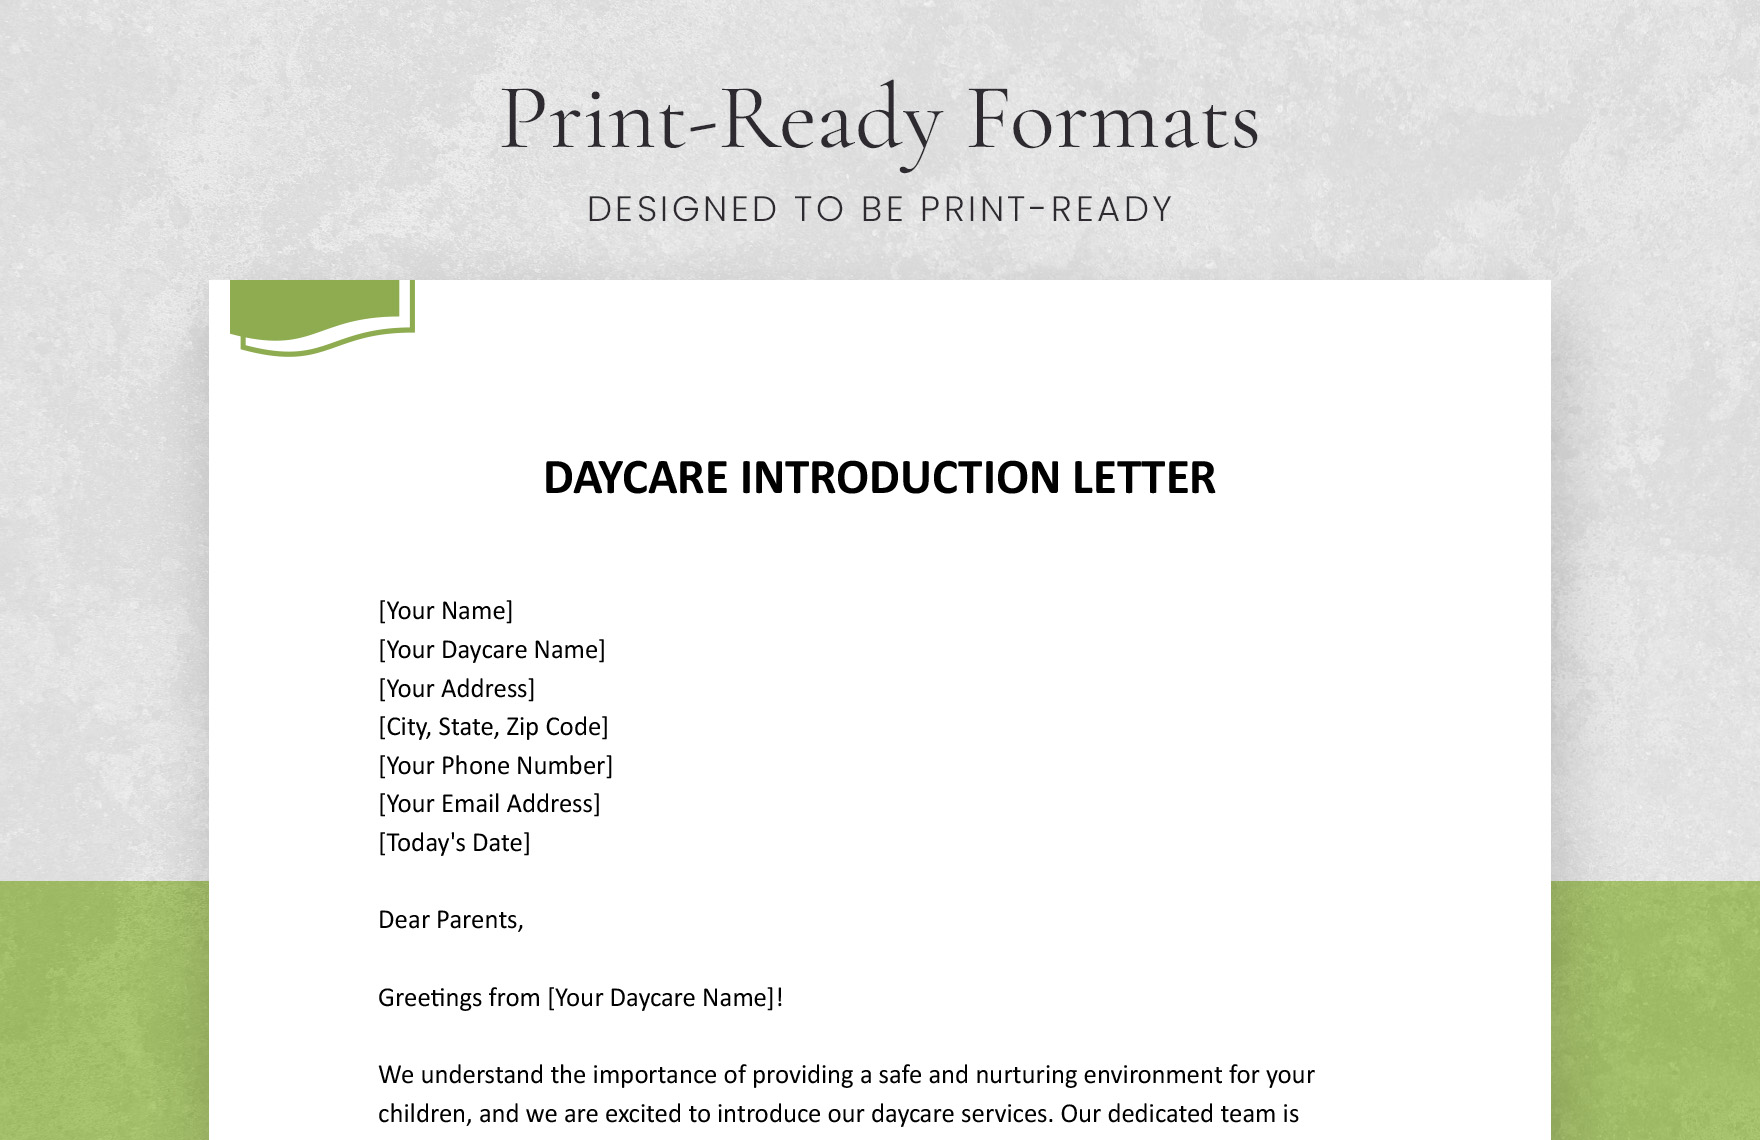 Daycare Introduction Letter